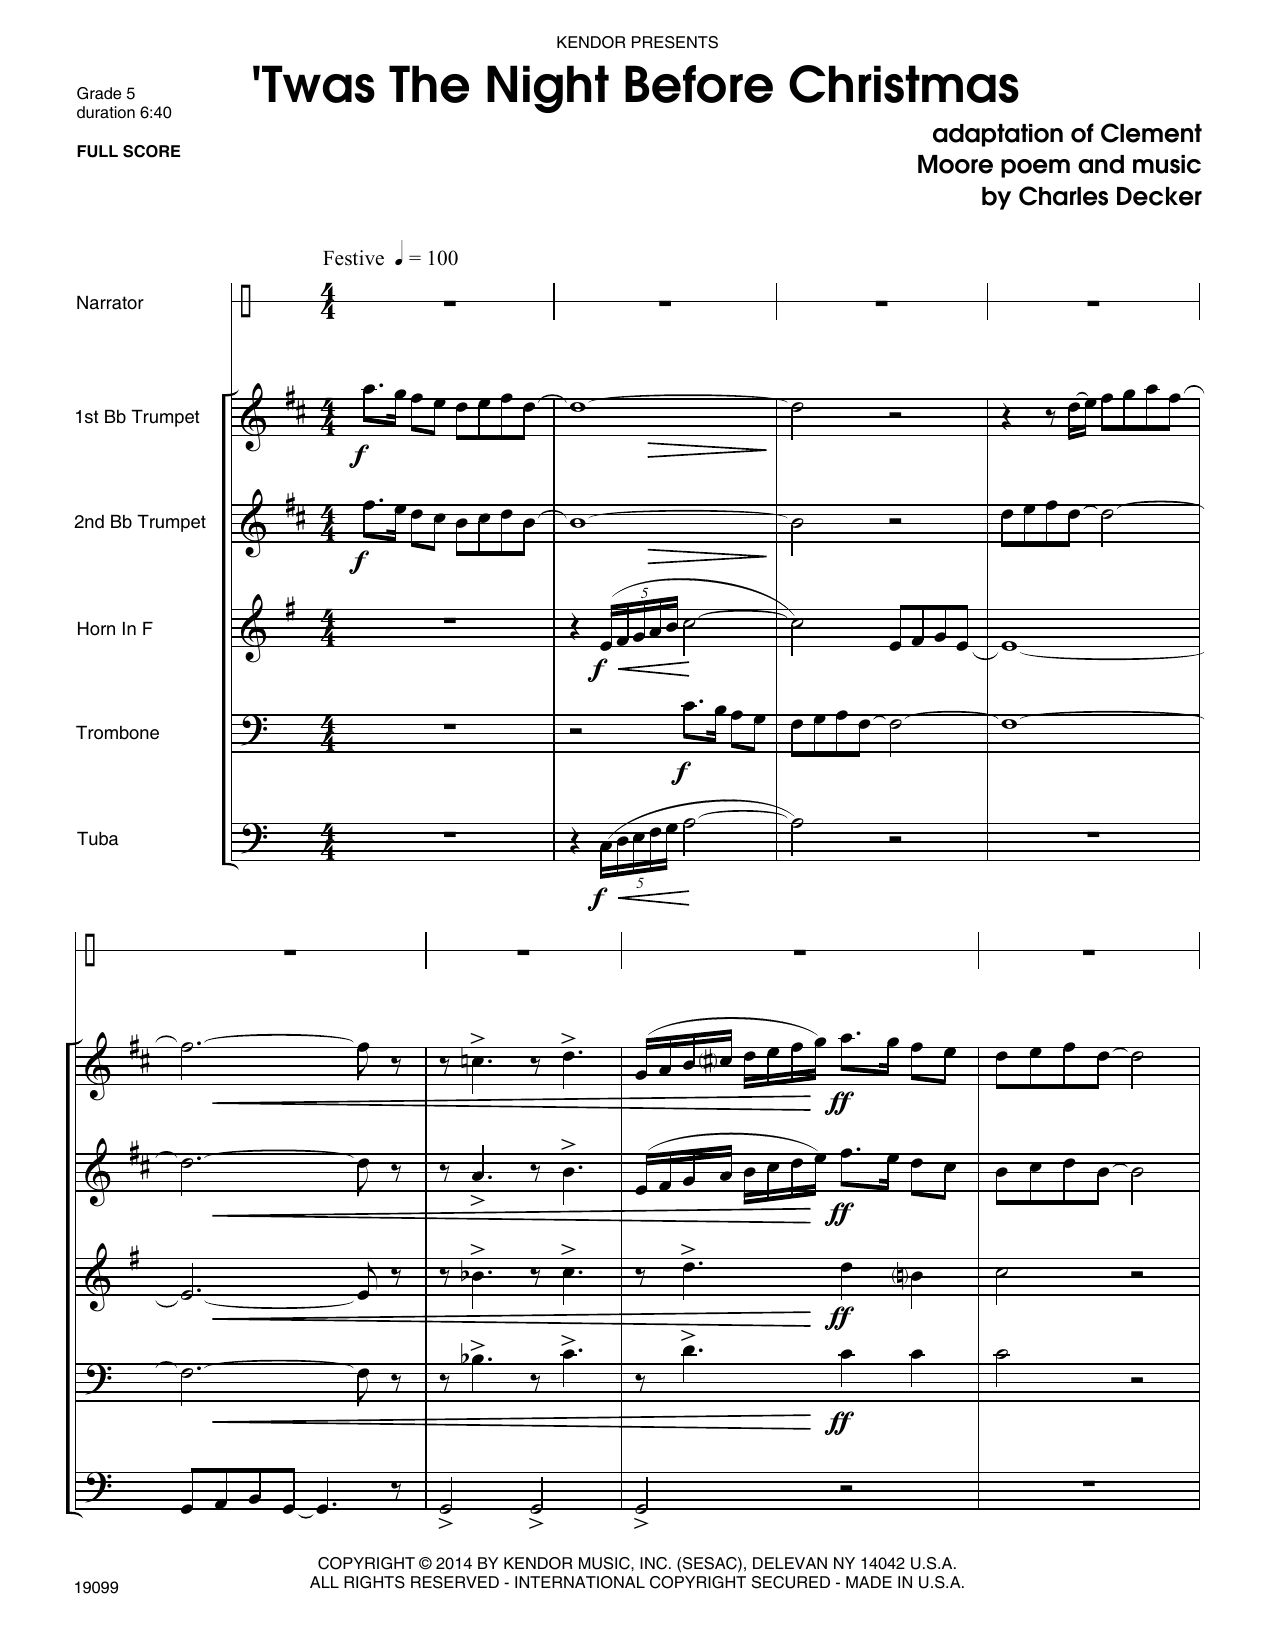 Download Charles Decker Twas The Night Before Christmas - Full Sheet Music